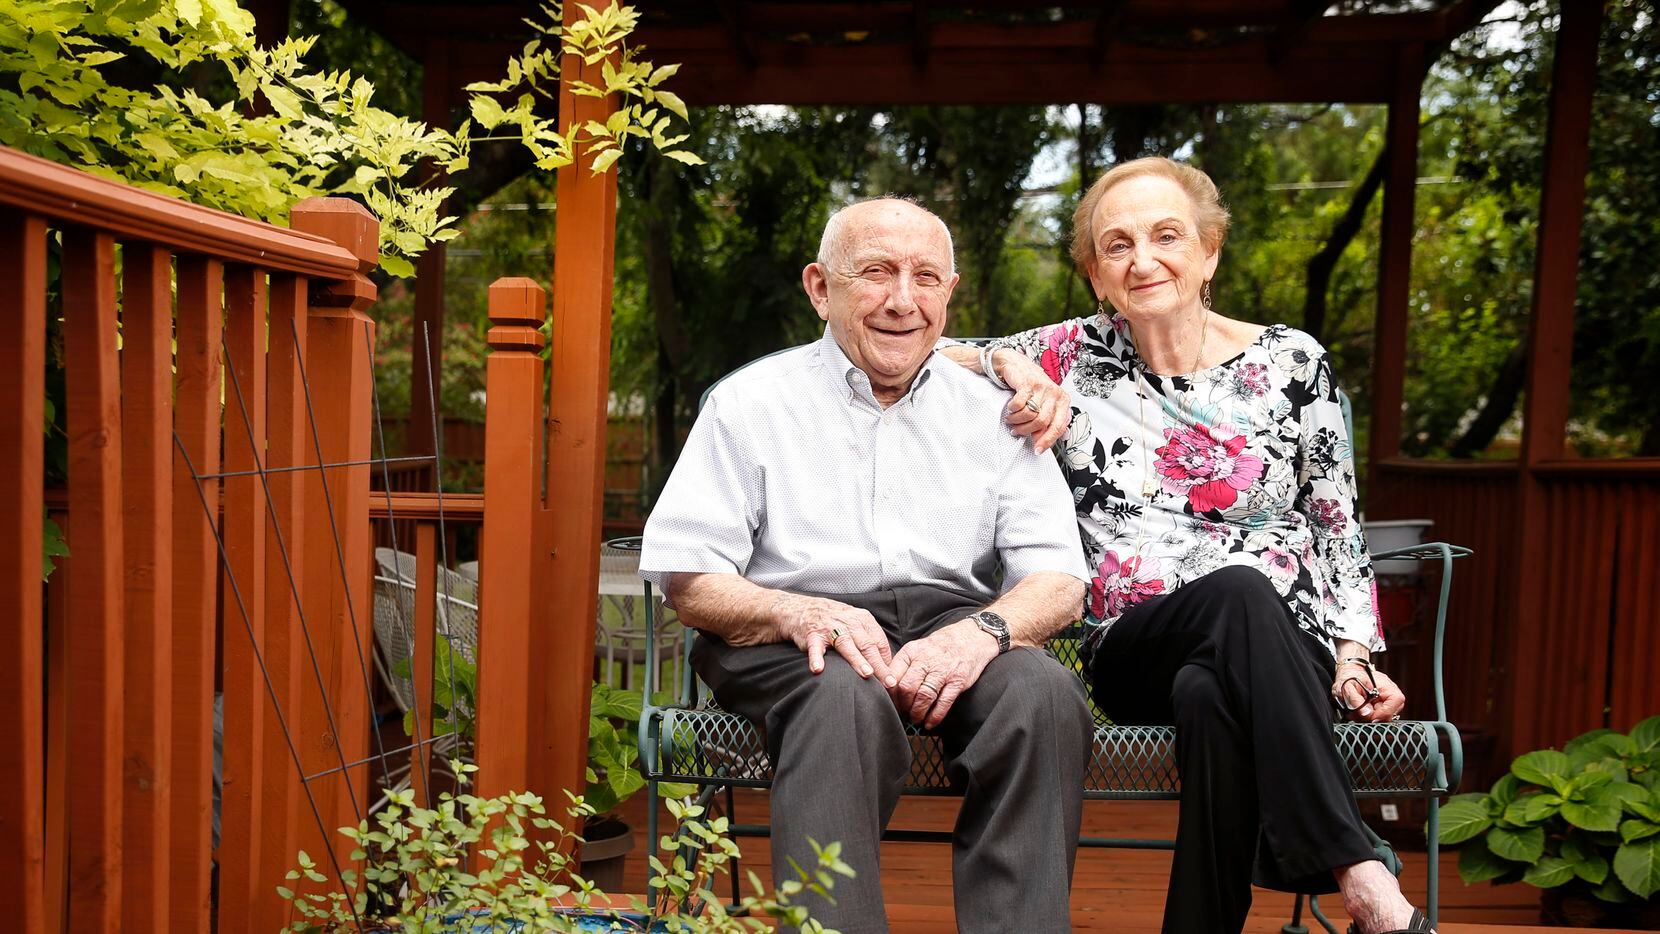 Holocaust survivor Max Glauben and his wife Frieda are photographed outside their Dallas...